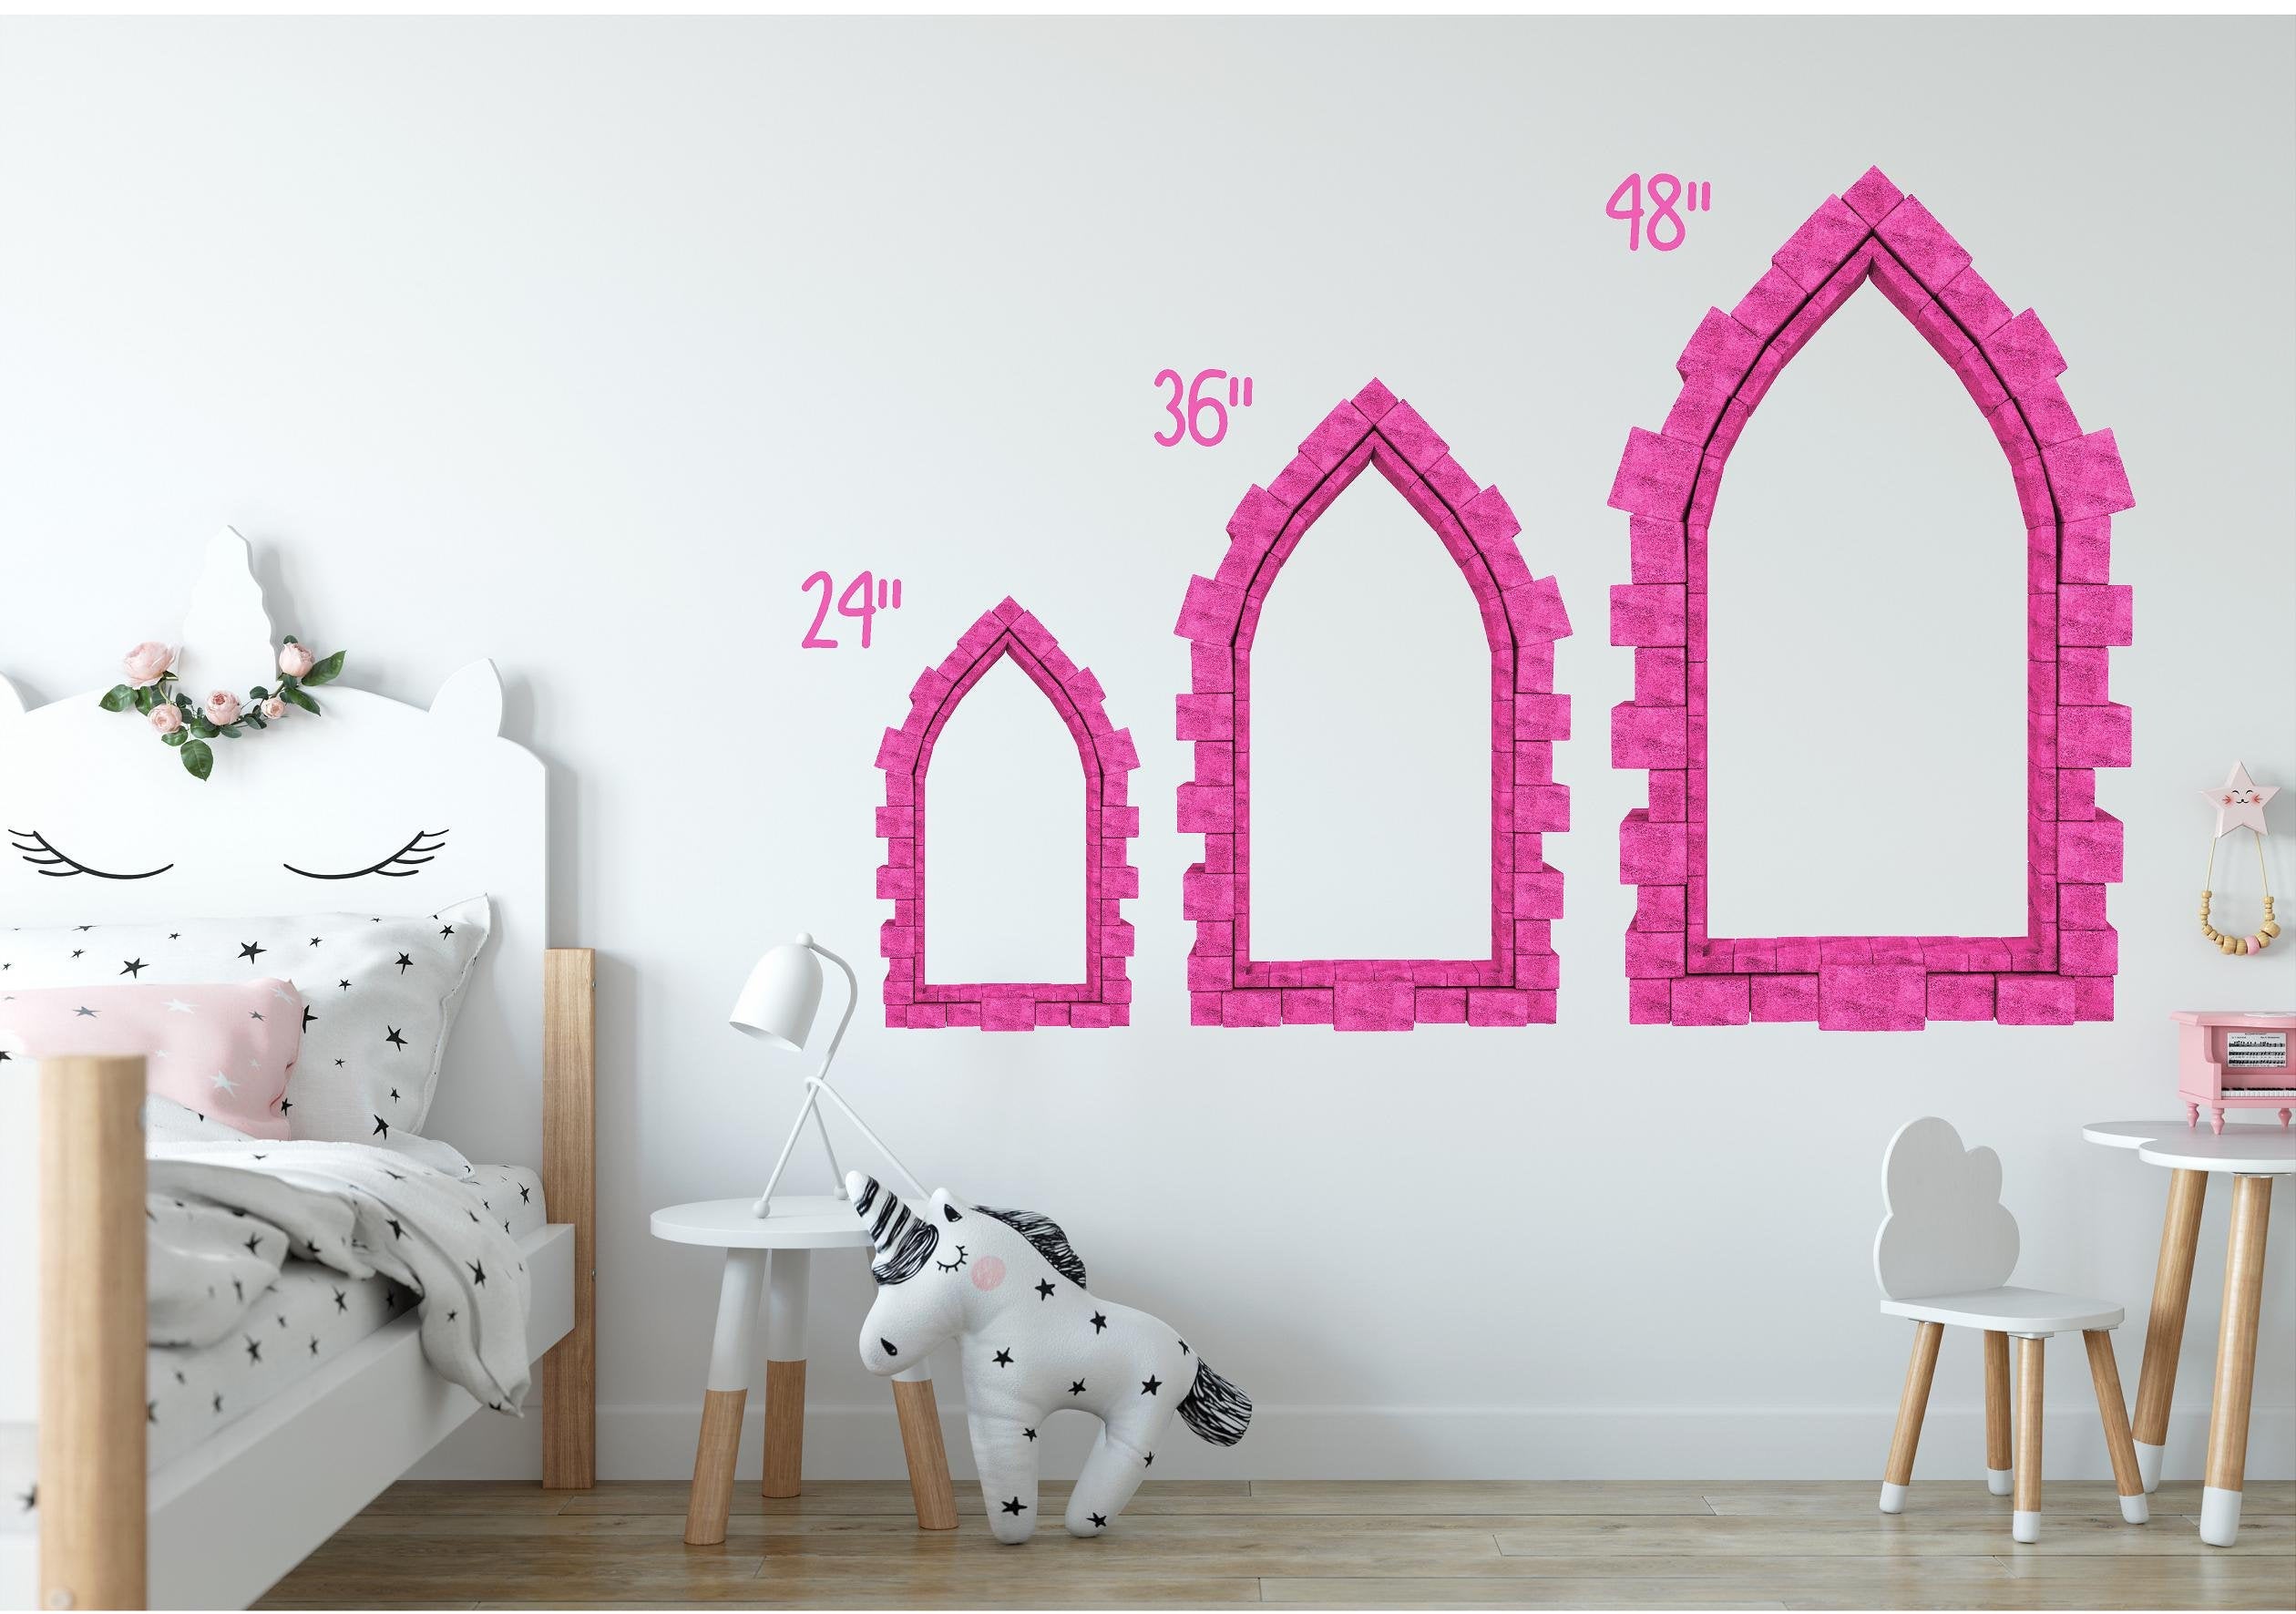 3D Castle Window Fairy Tale Cherry Blossom Trees Wall Decal Set of 2 Removable Fabric Vinyl Wall Sticker | DecalBaby